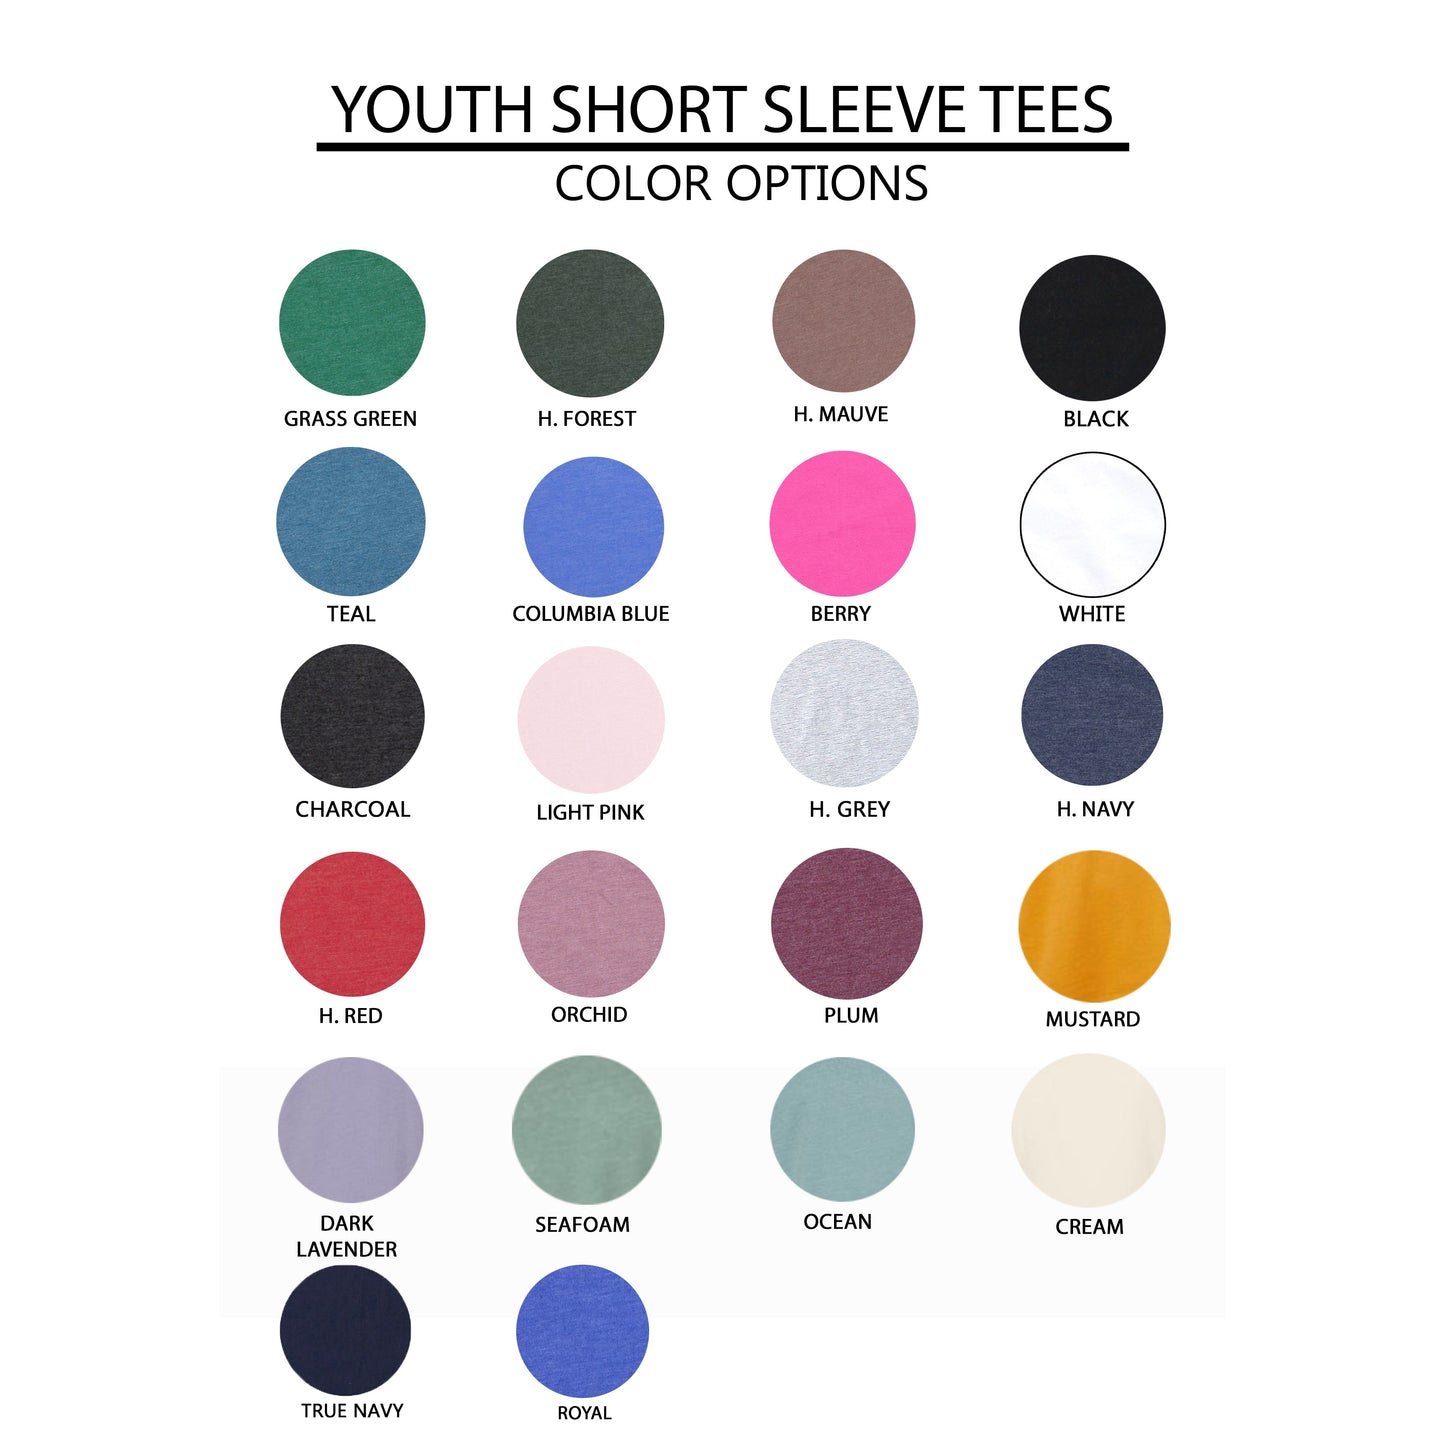 So Very Loved | Youth Short Sleeve Crew Neck